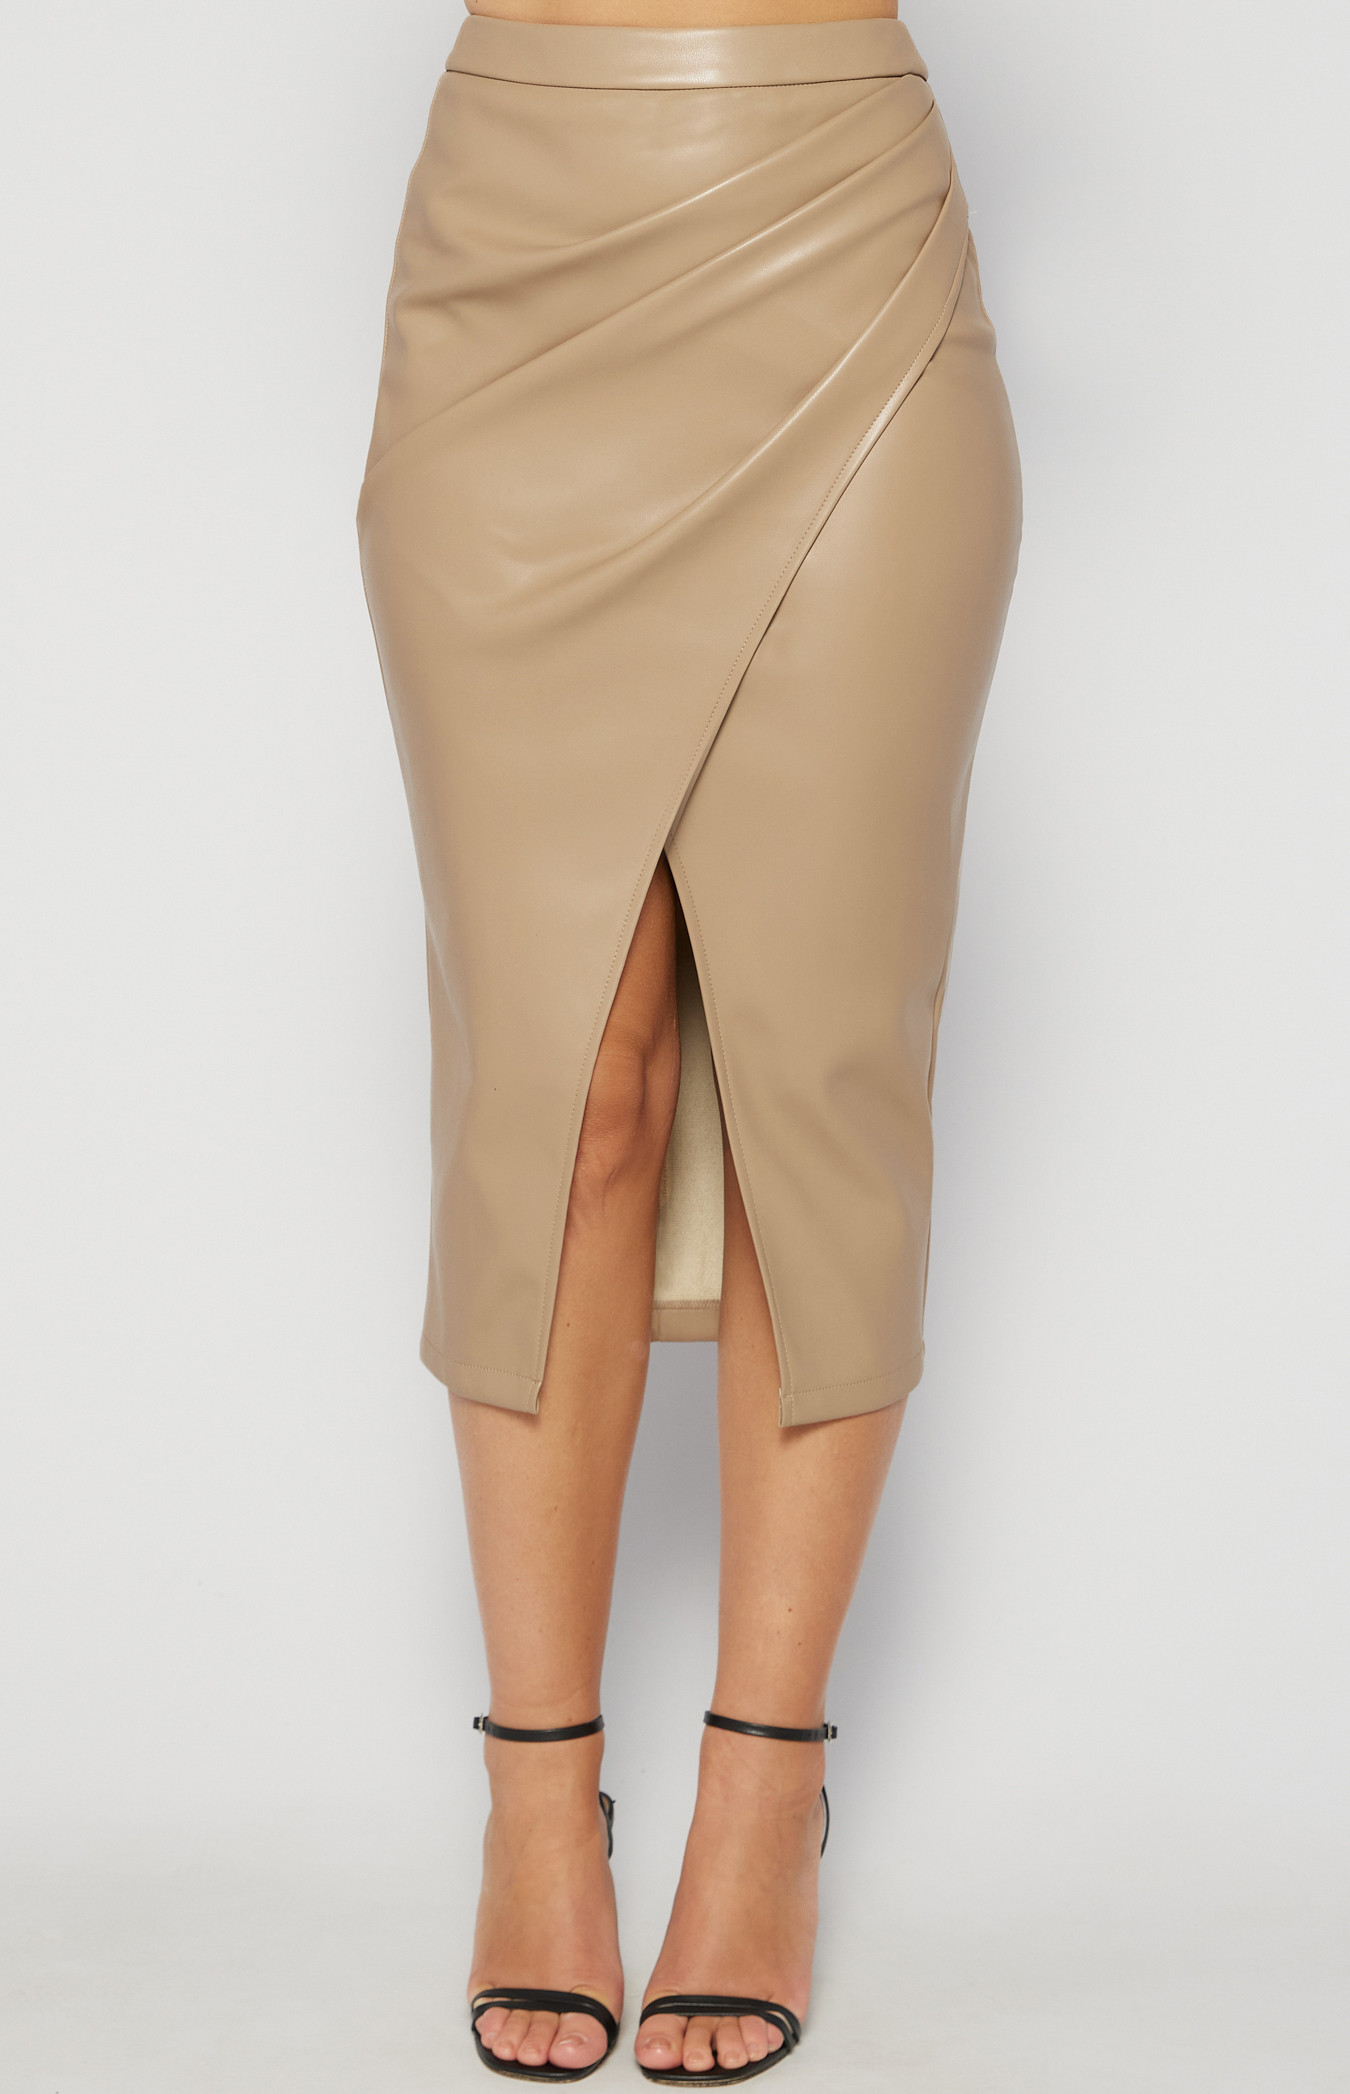 Faux Leather Midi Skirt with Side Pleated Details (SSK356B)